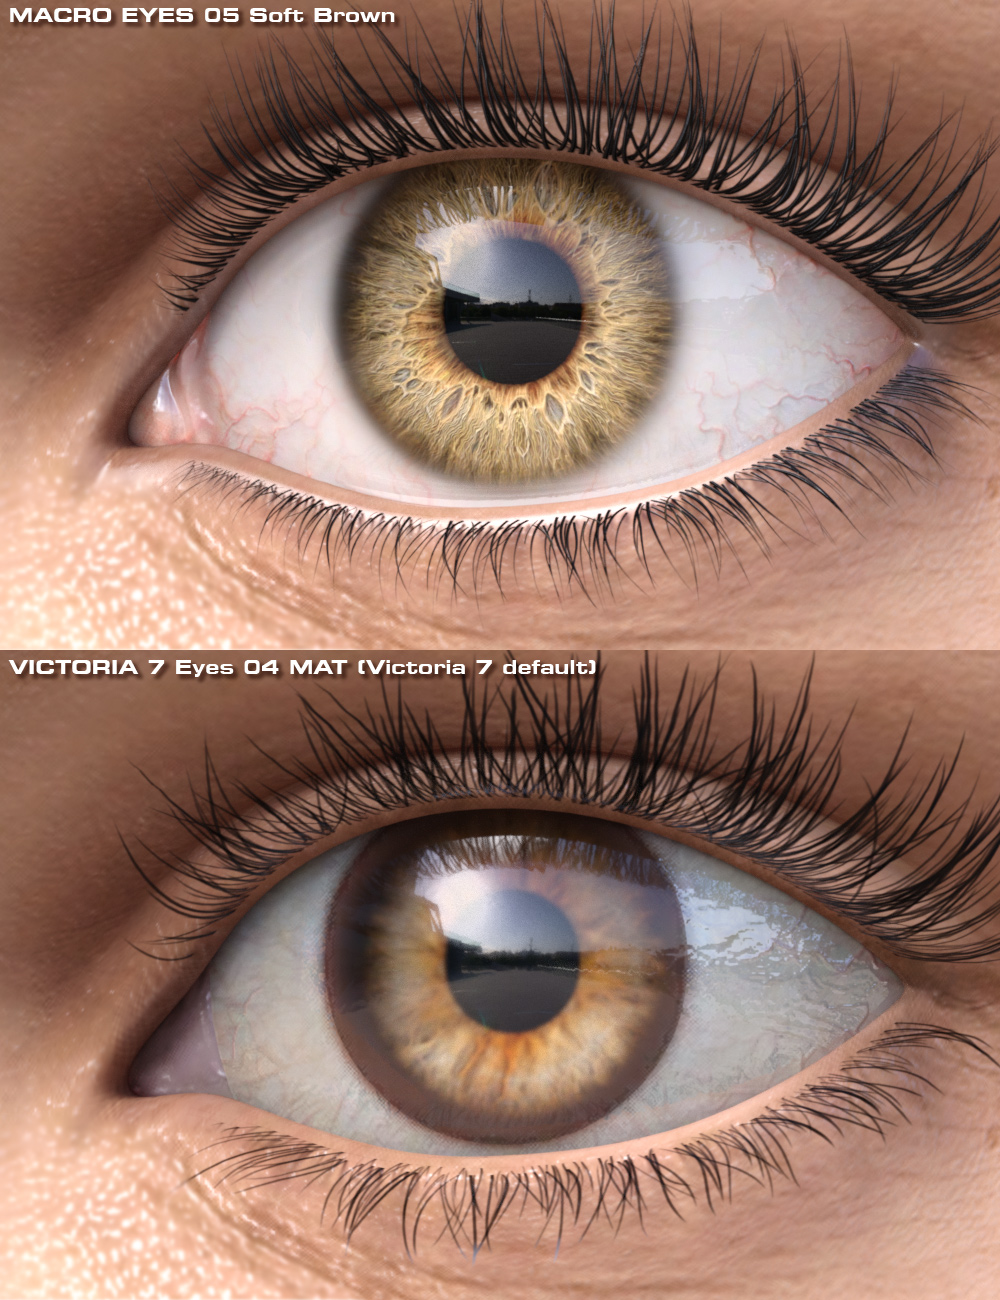 Macro Eyes for Iray Browns and Exotics